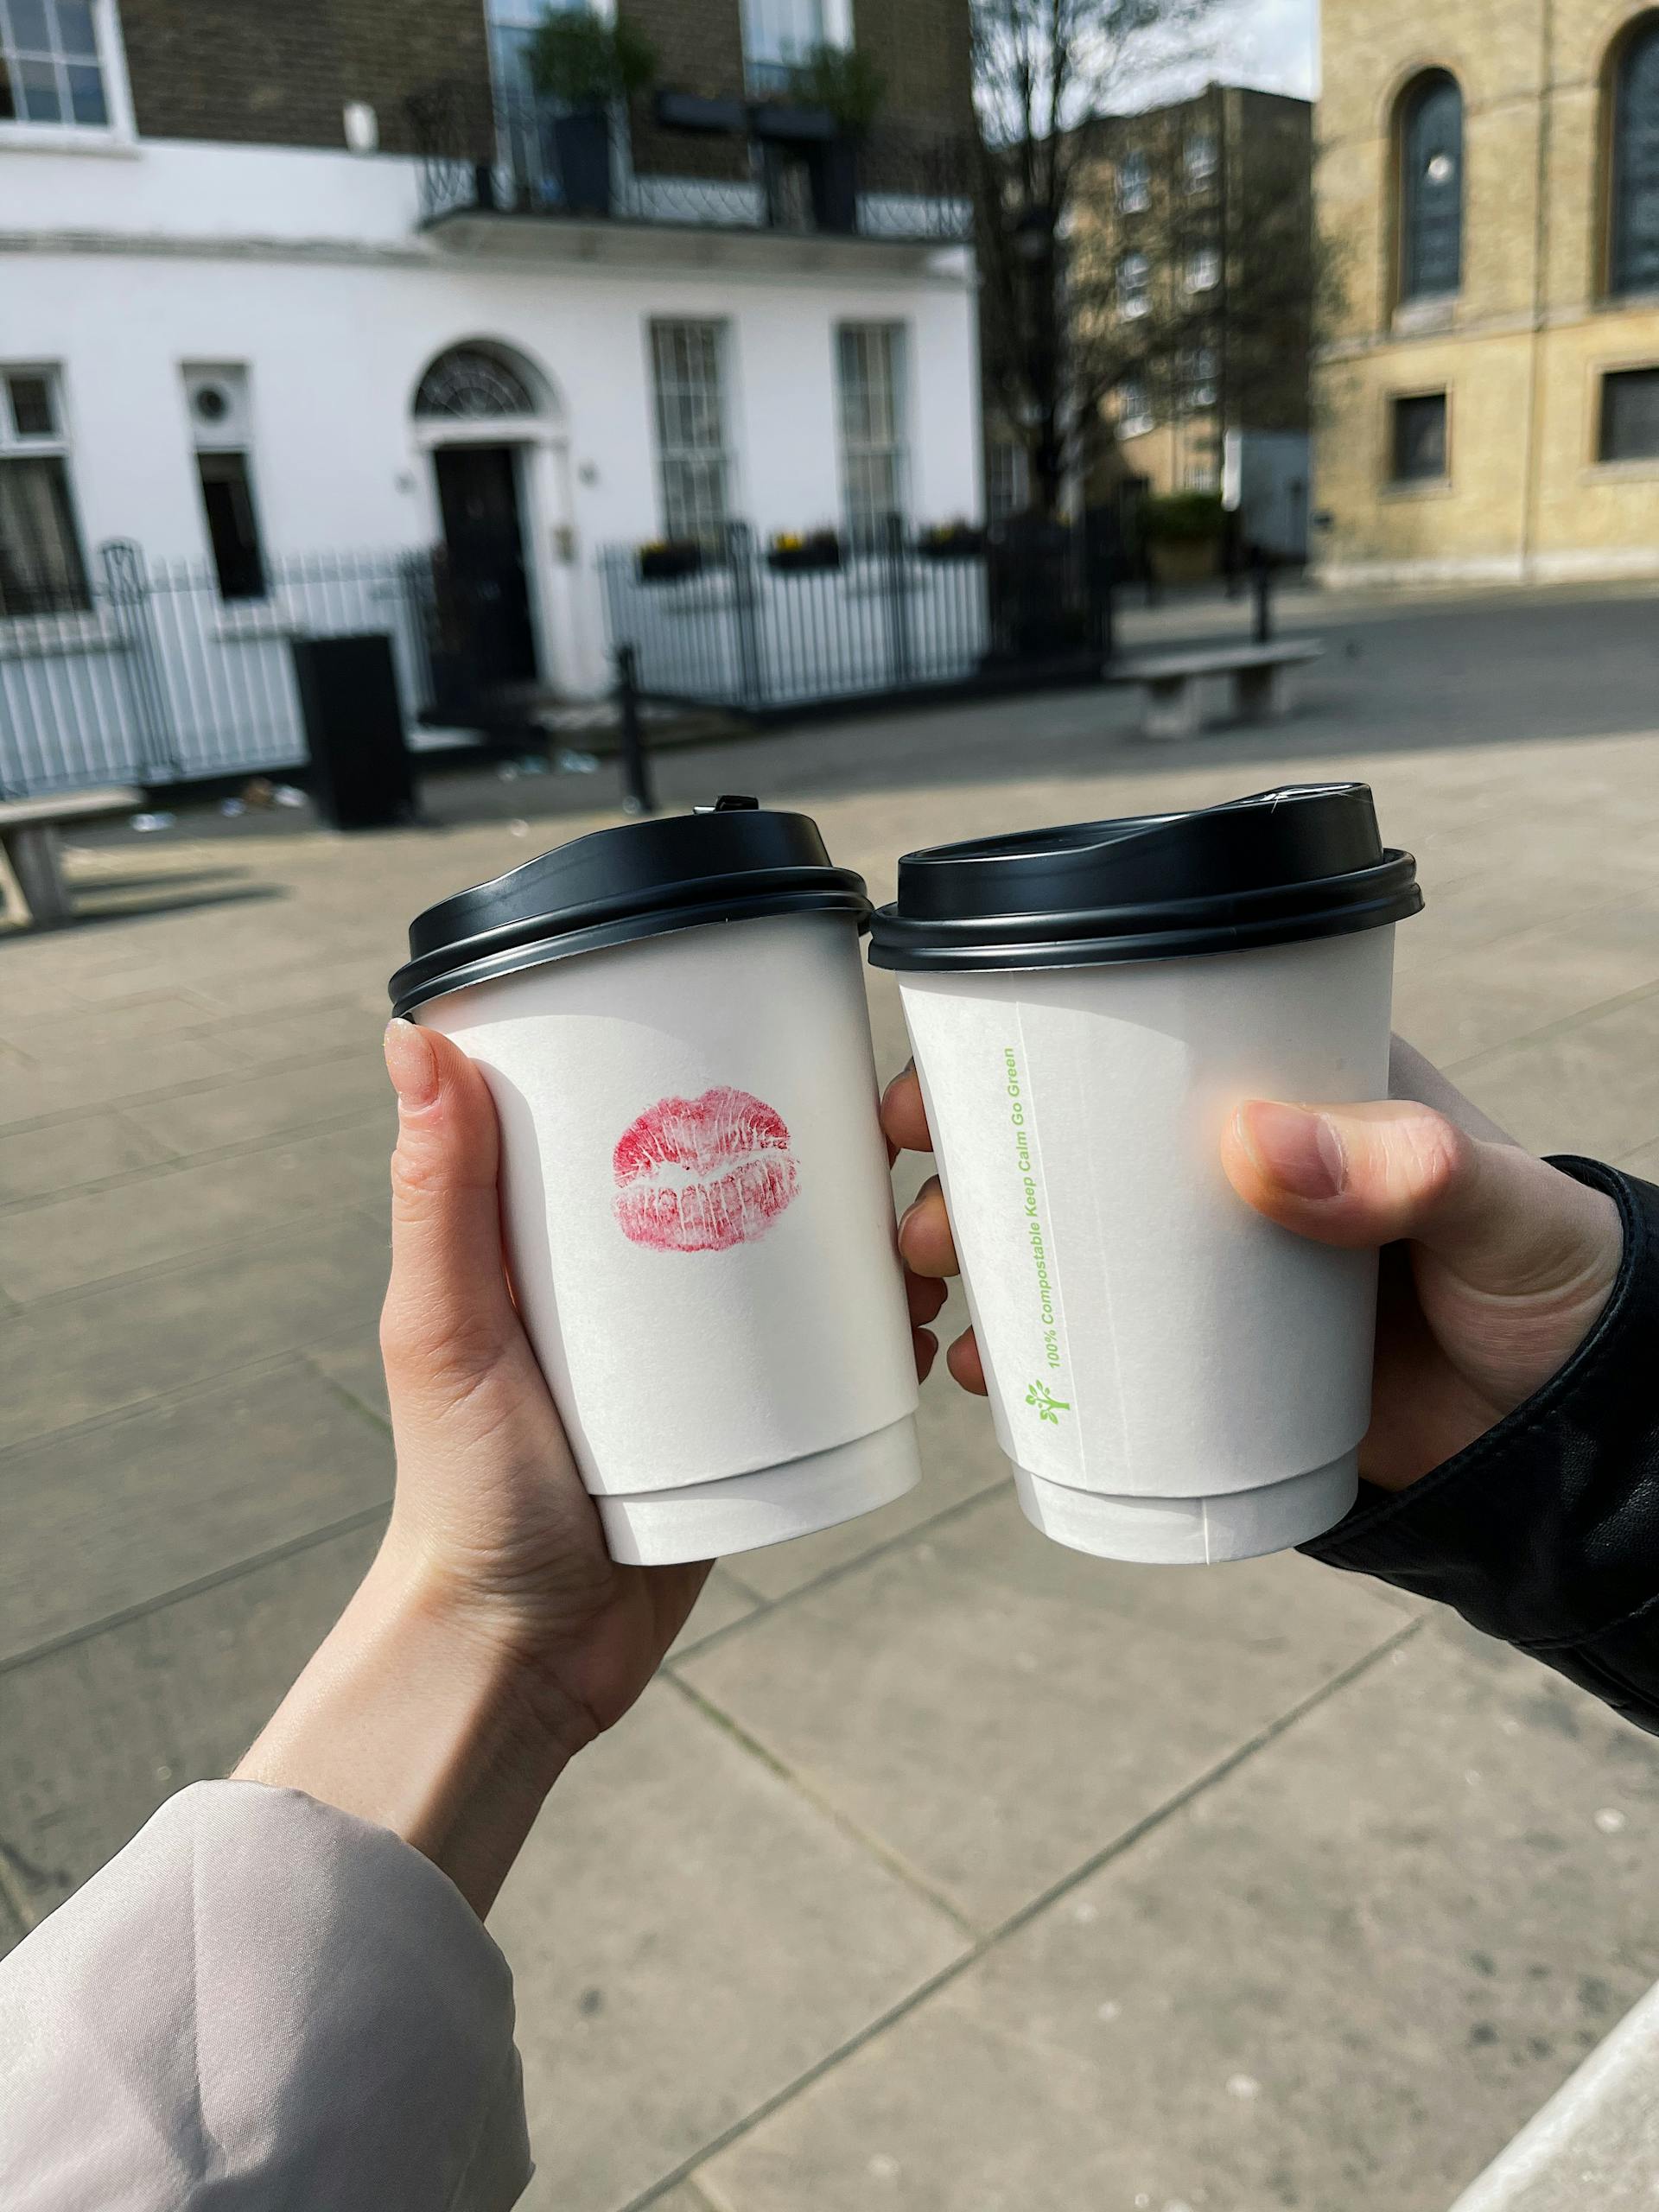 A couple holding takeaway coffee | Source: Pexels